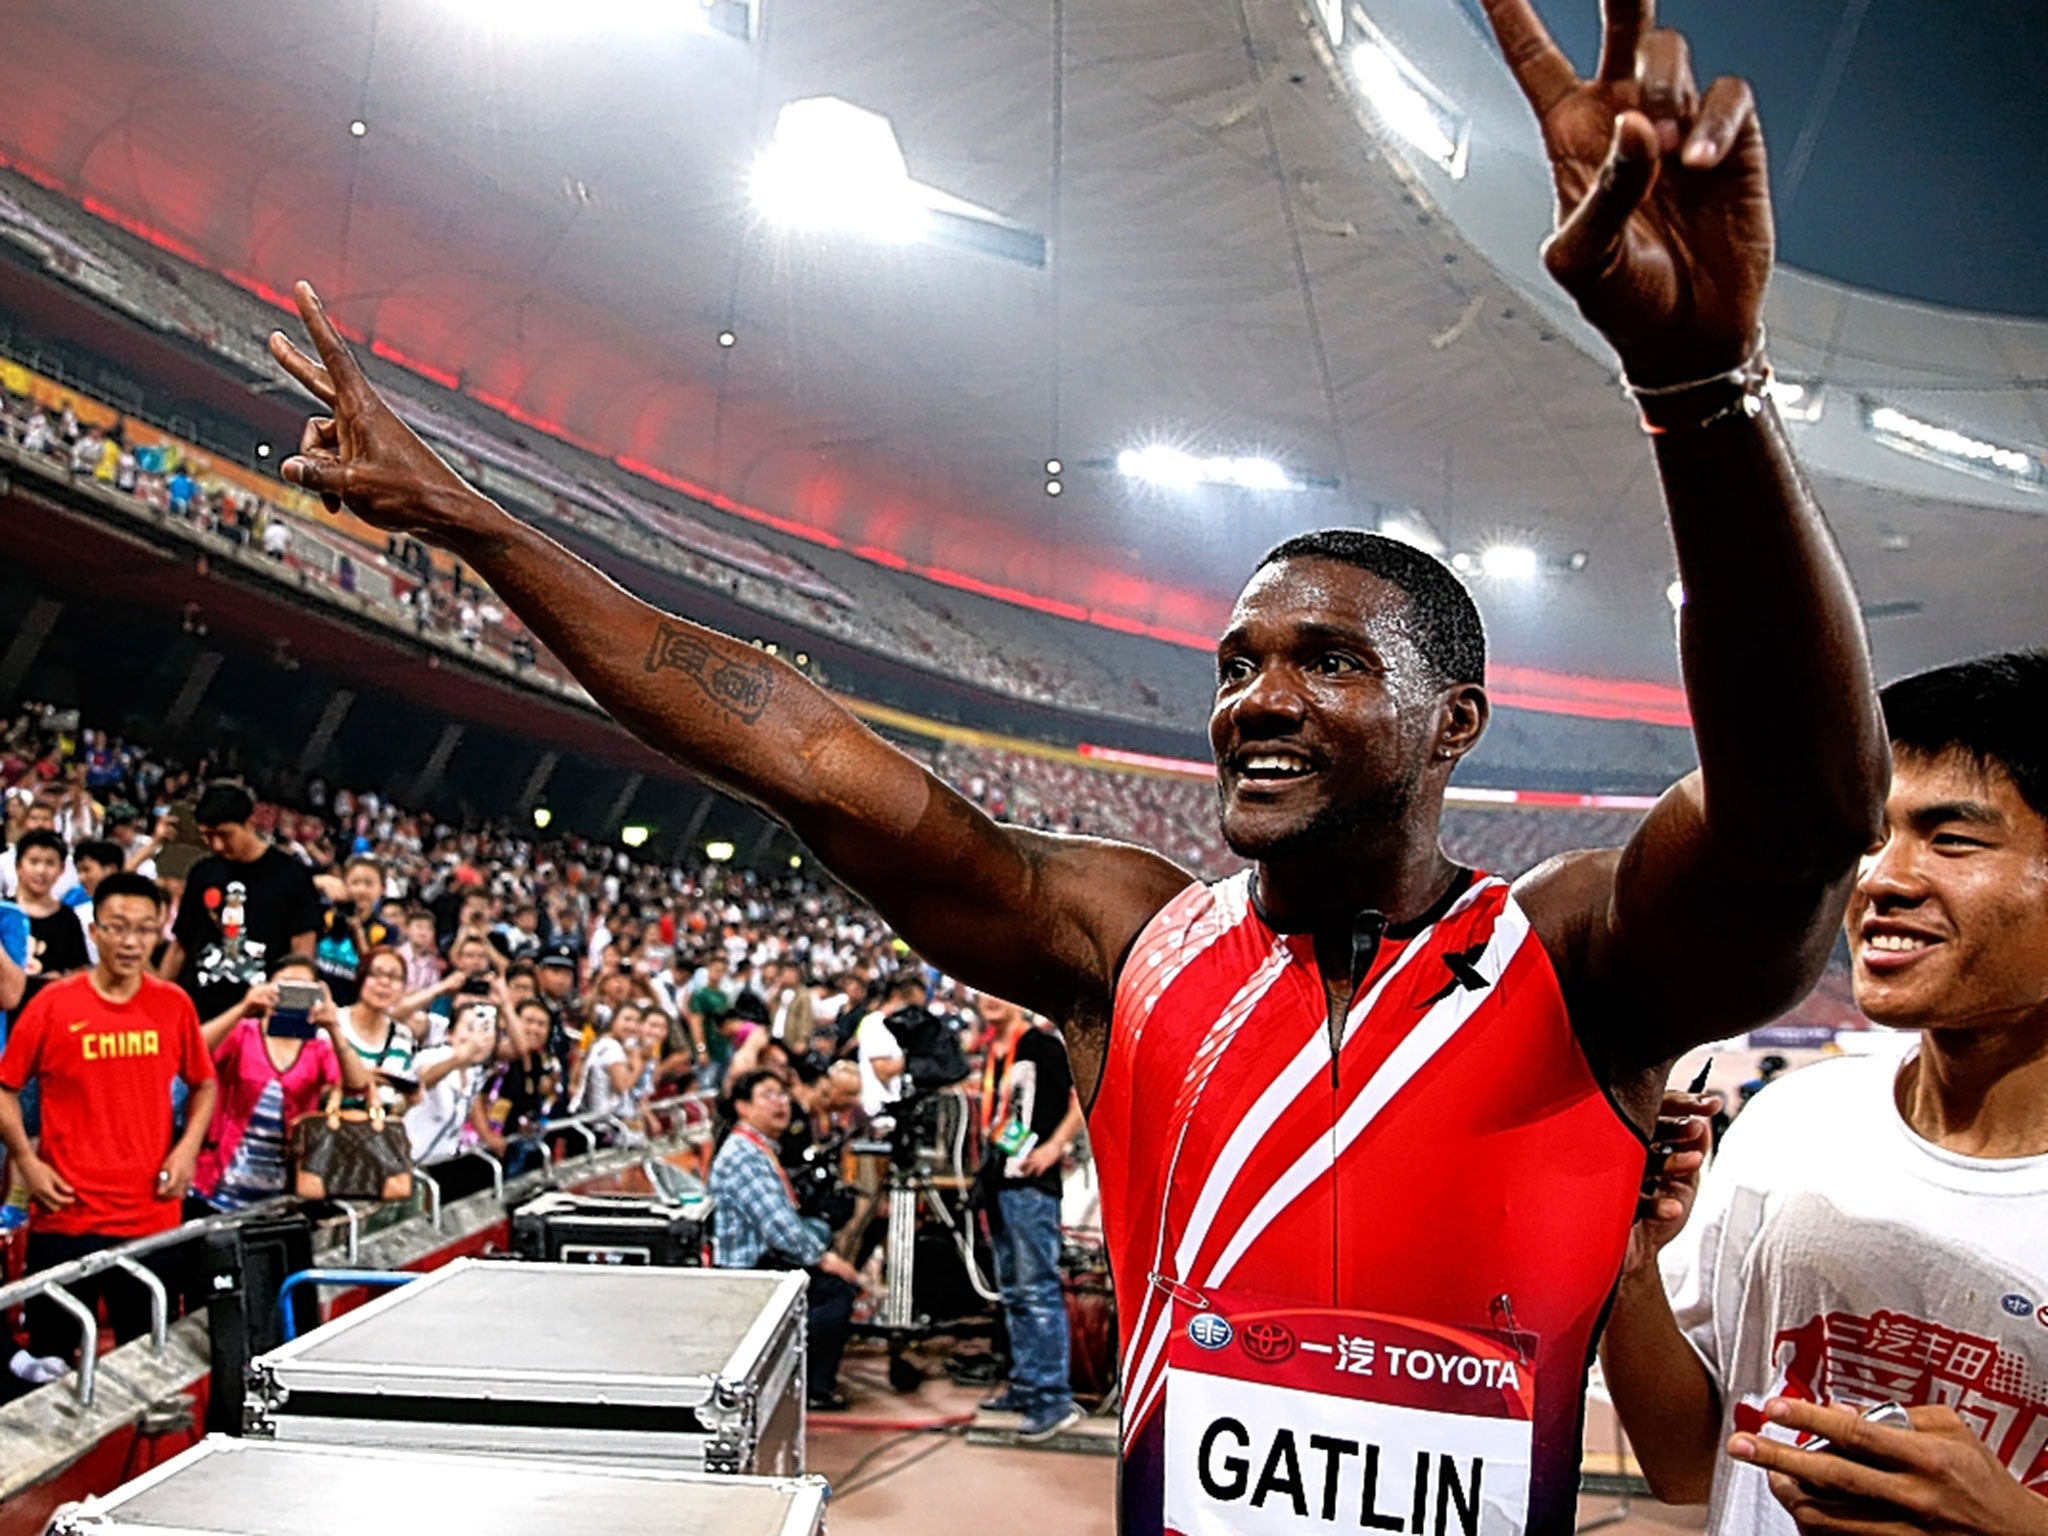 Justin Gatlin revels in his 100m victory at the IAAF World Challenge in Beijing last year